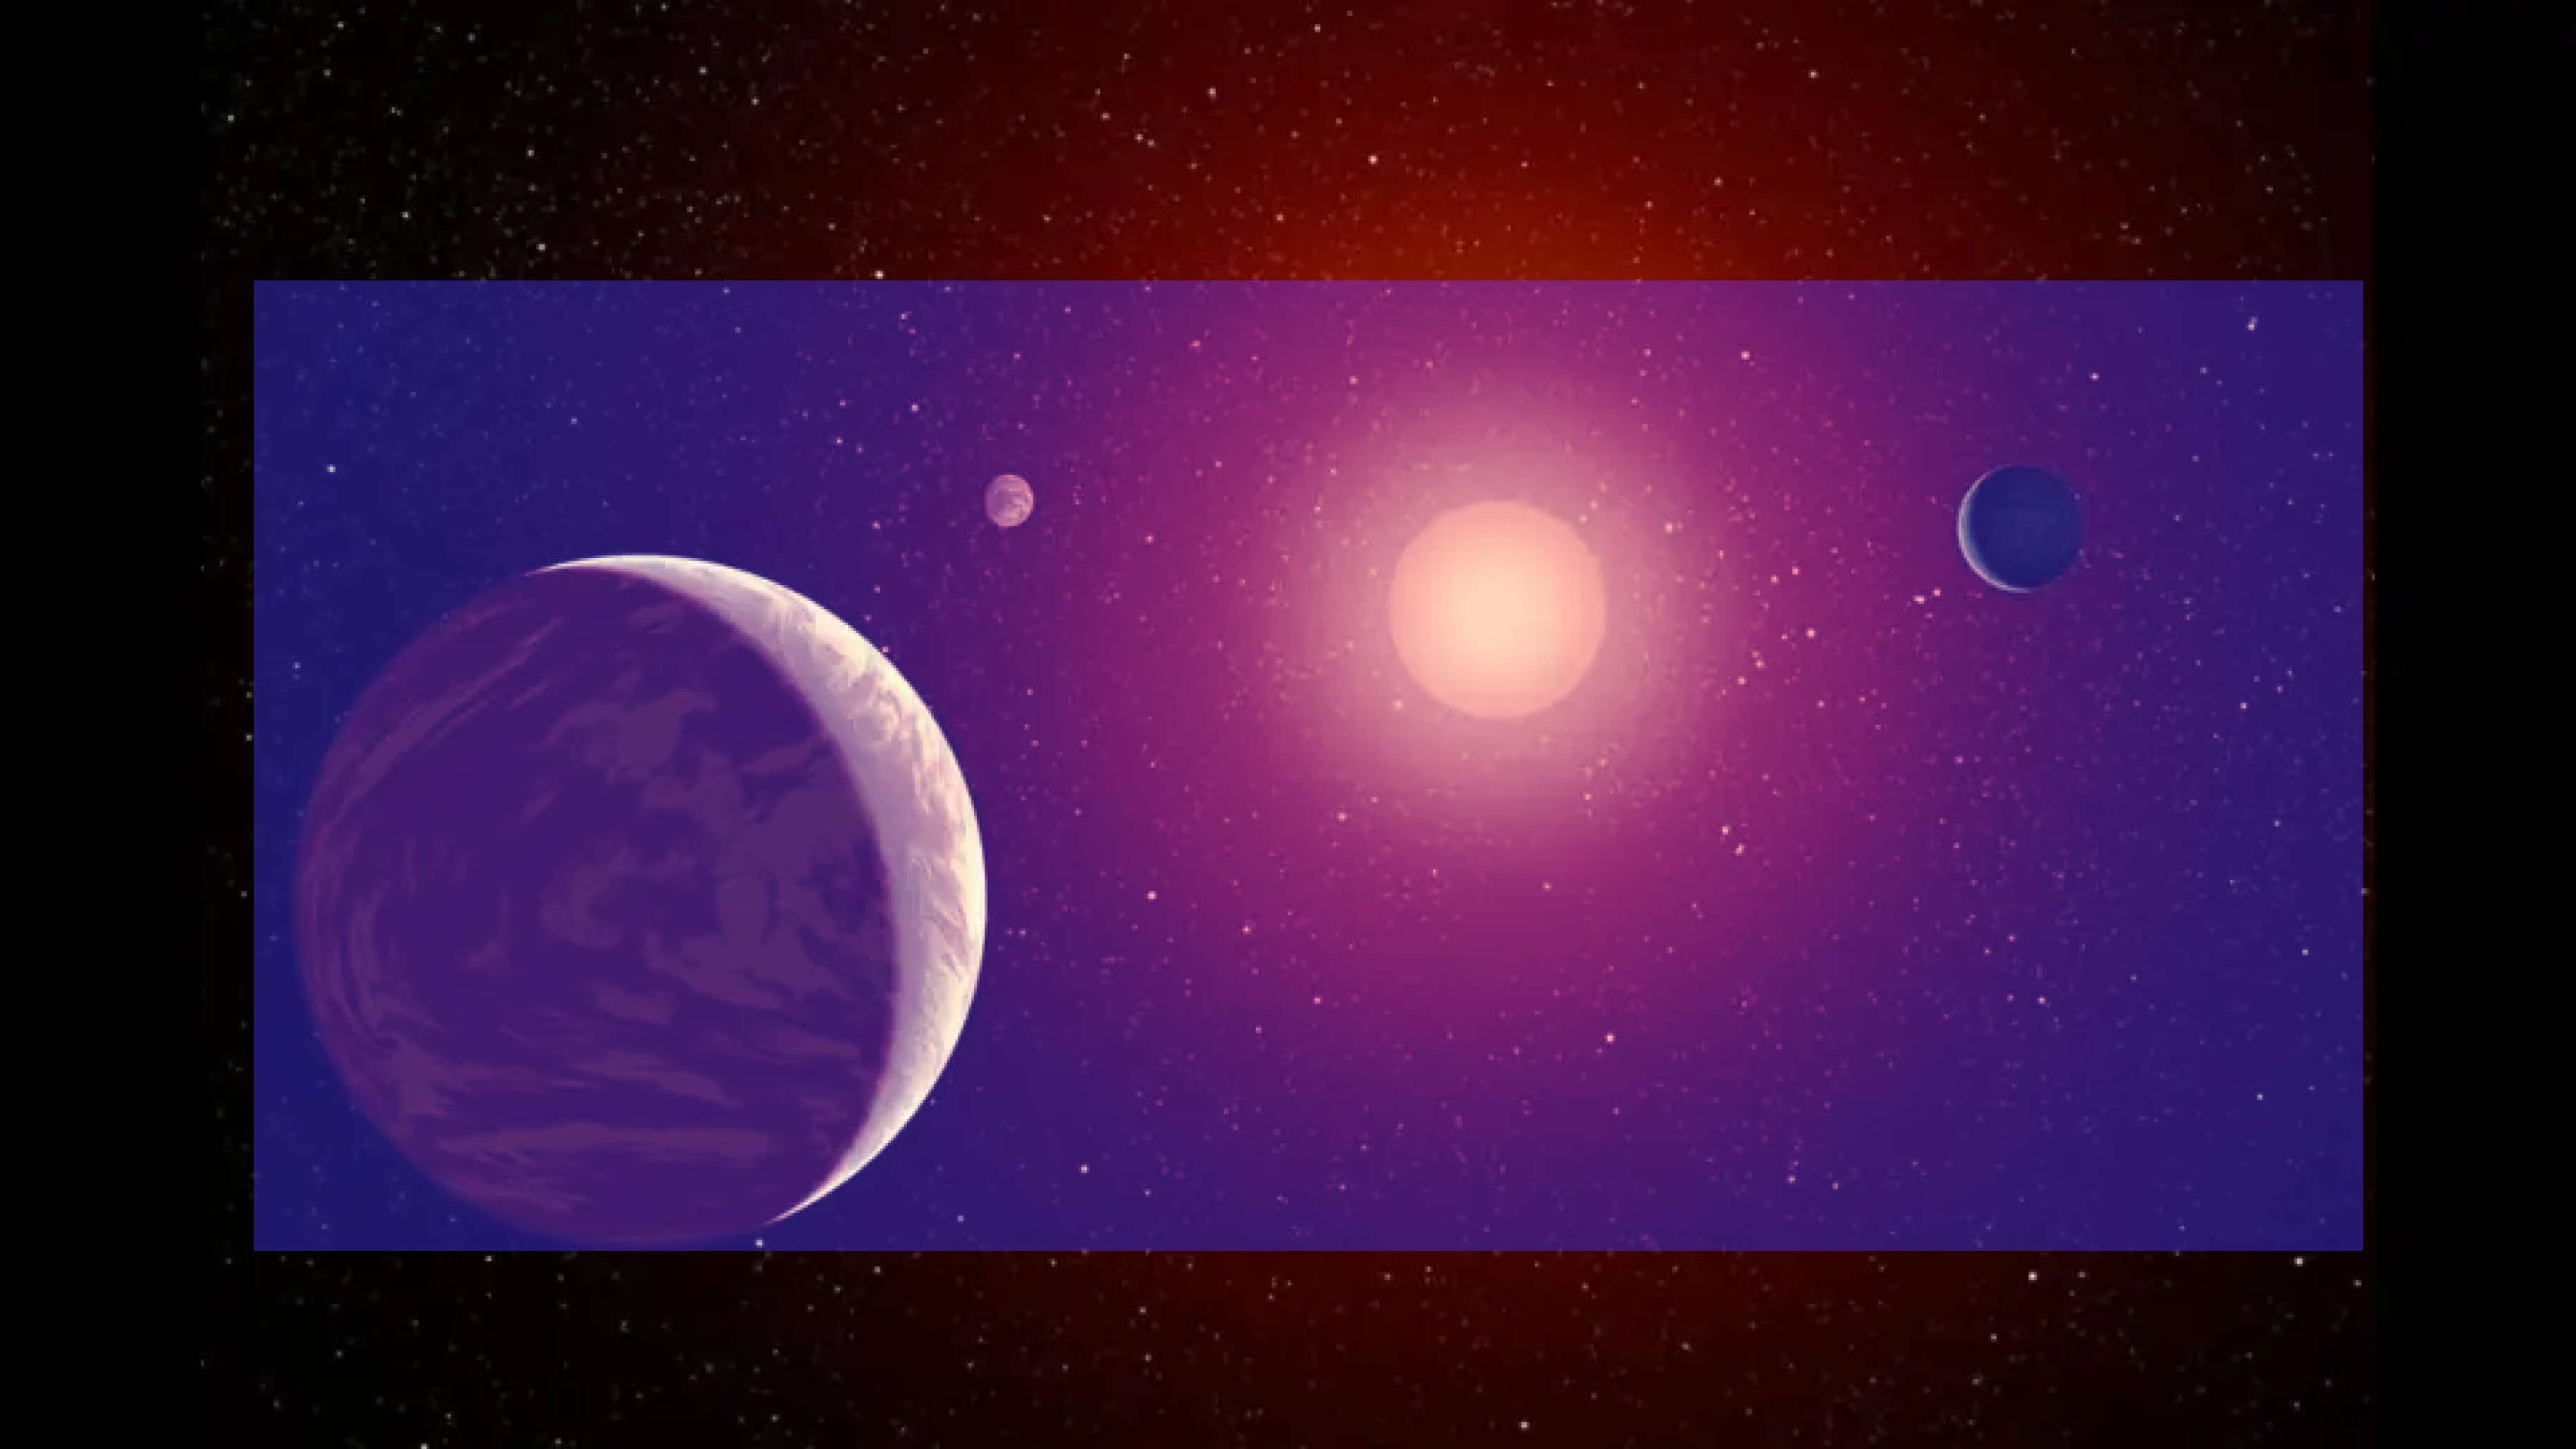 Planets in varying sizes orbiting around a bright central star in a purple-hued cosmos, where life persists.